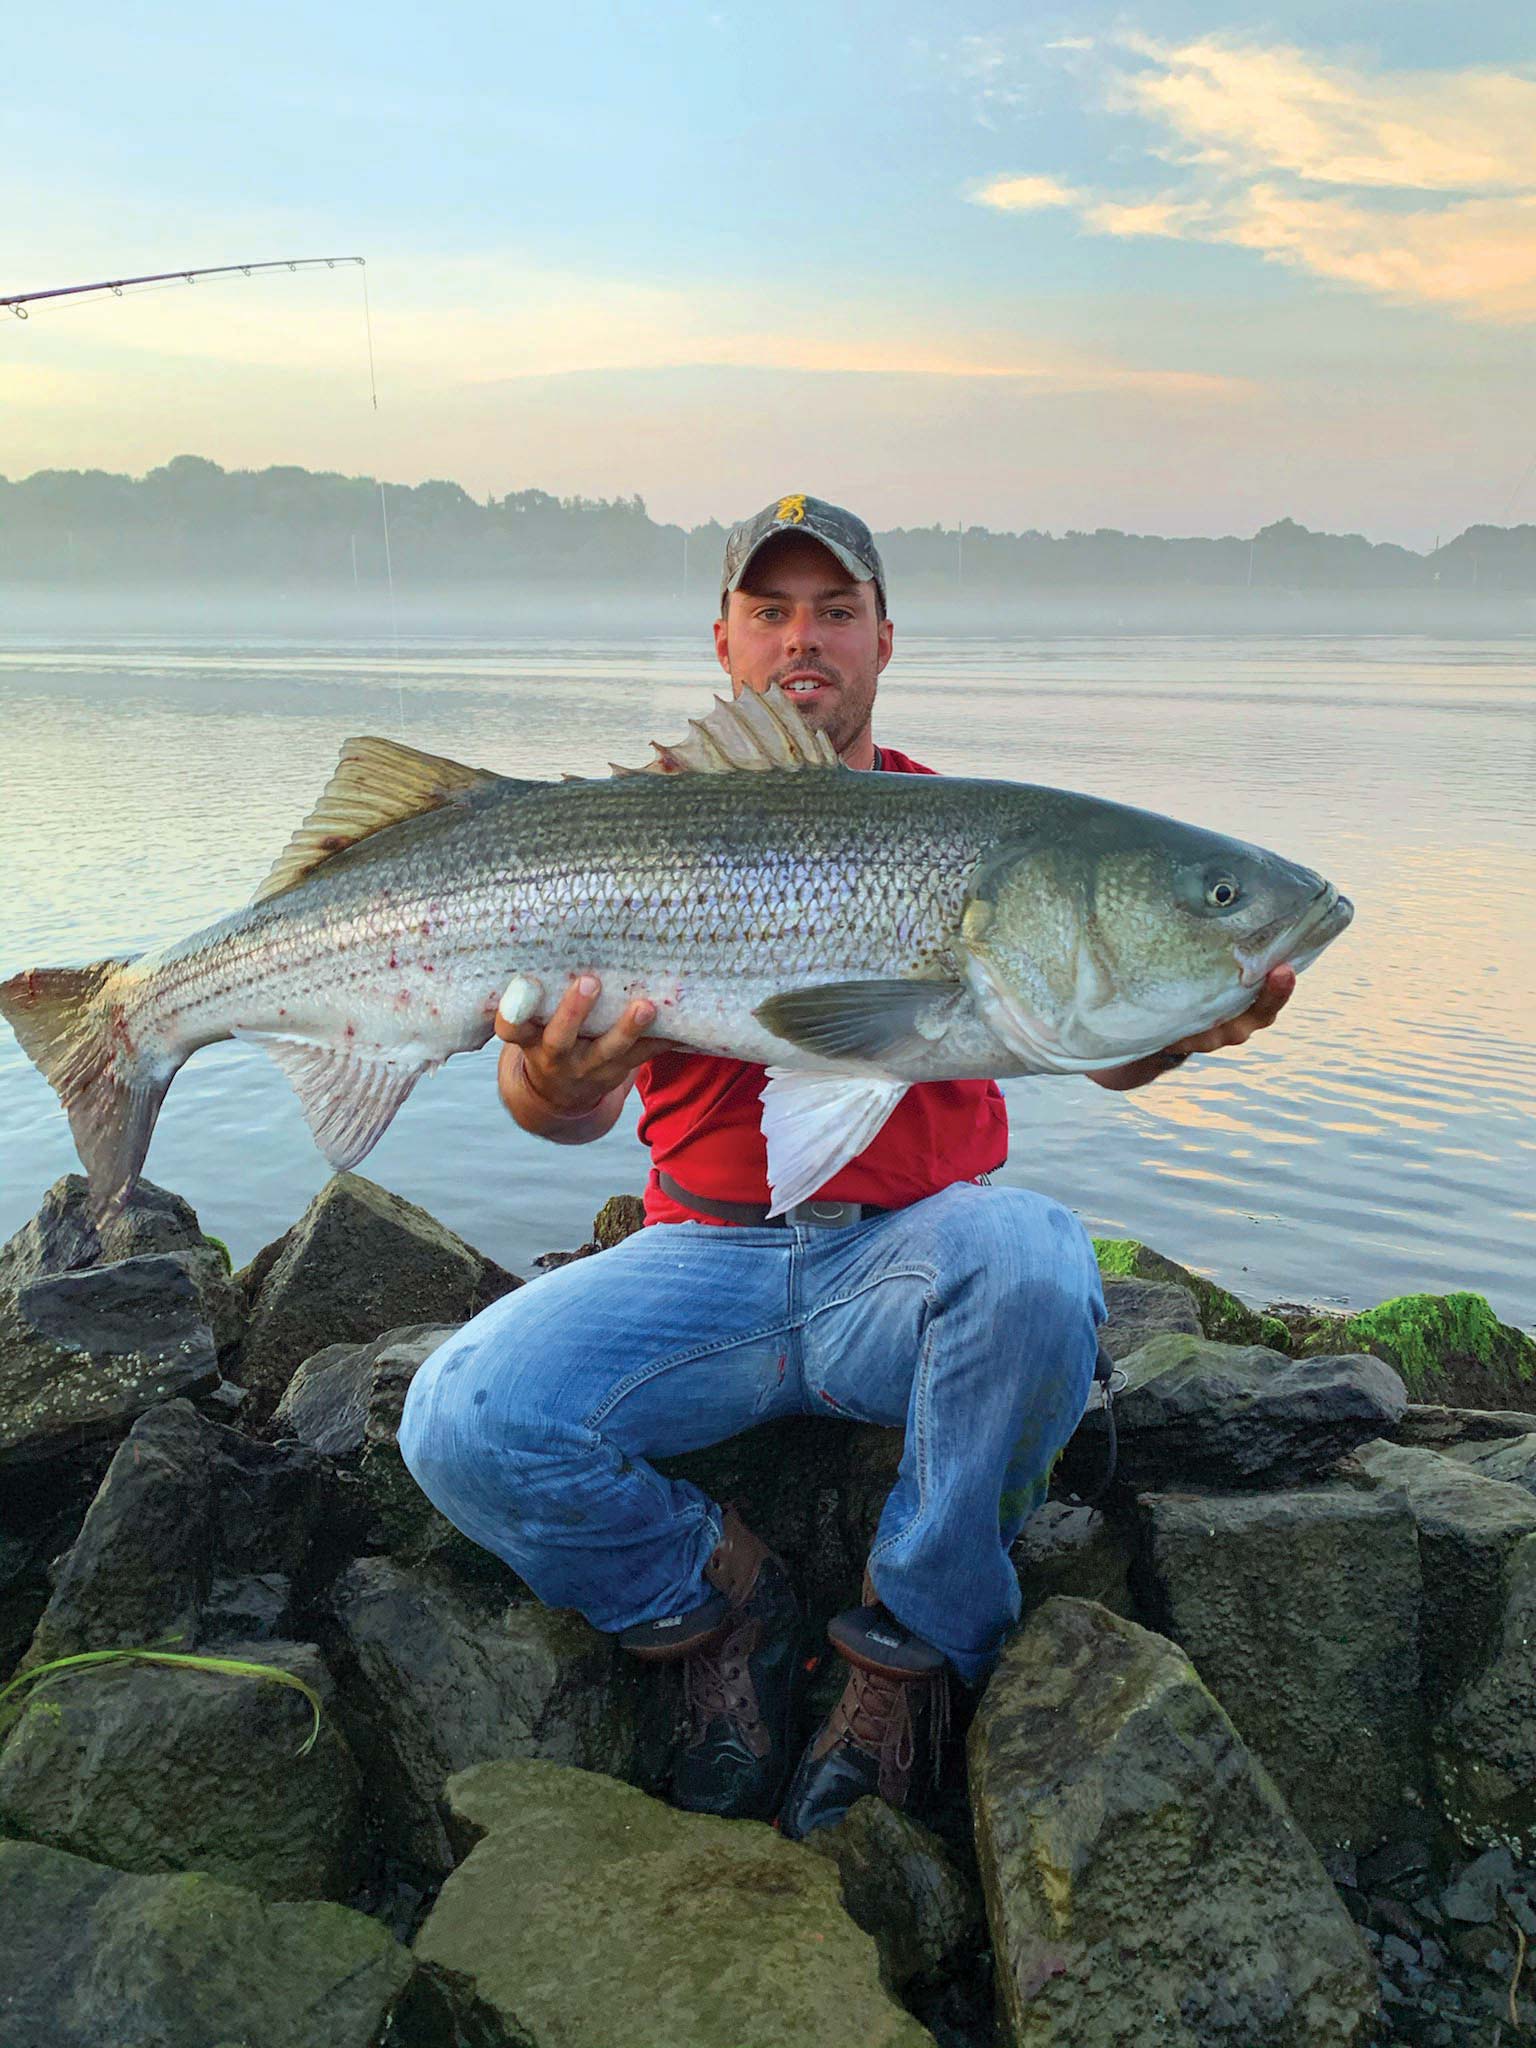 Five Must-Haves for Fishing the Cape Cod Canal